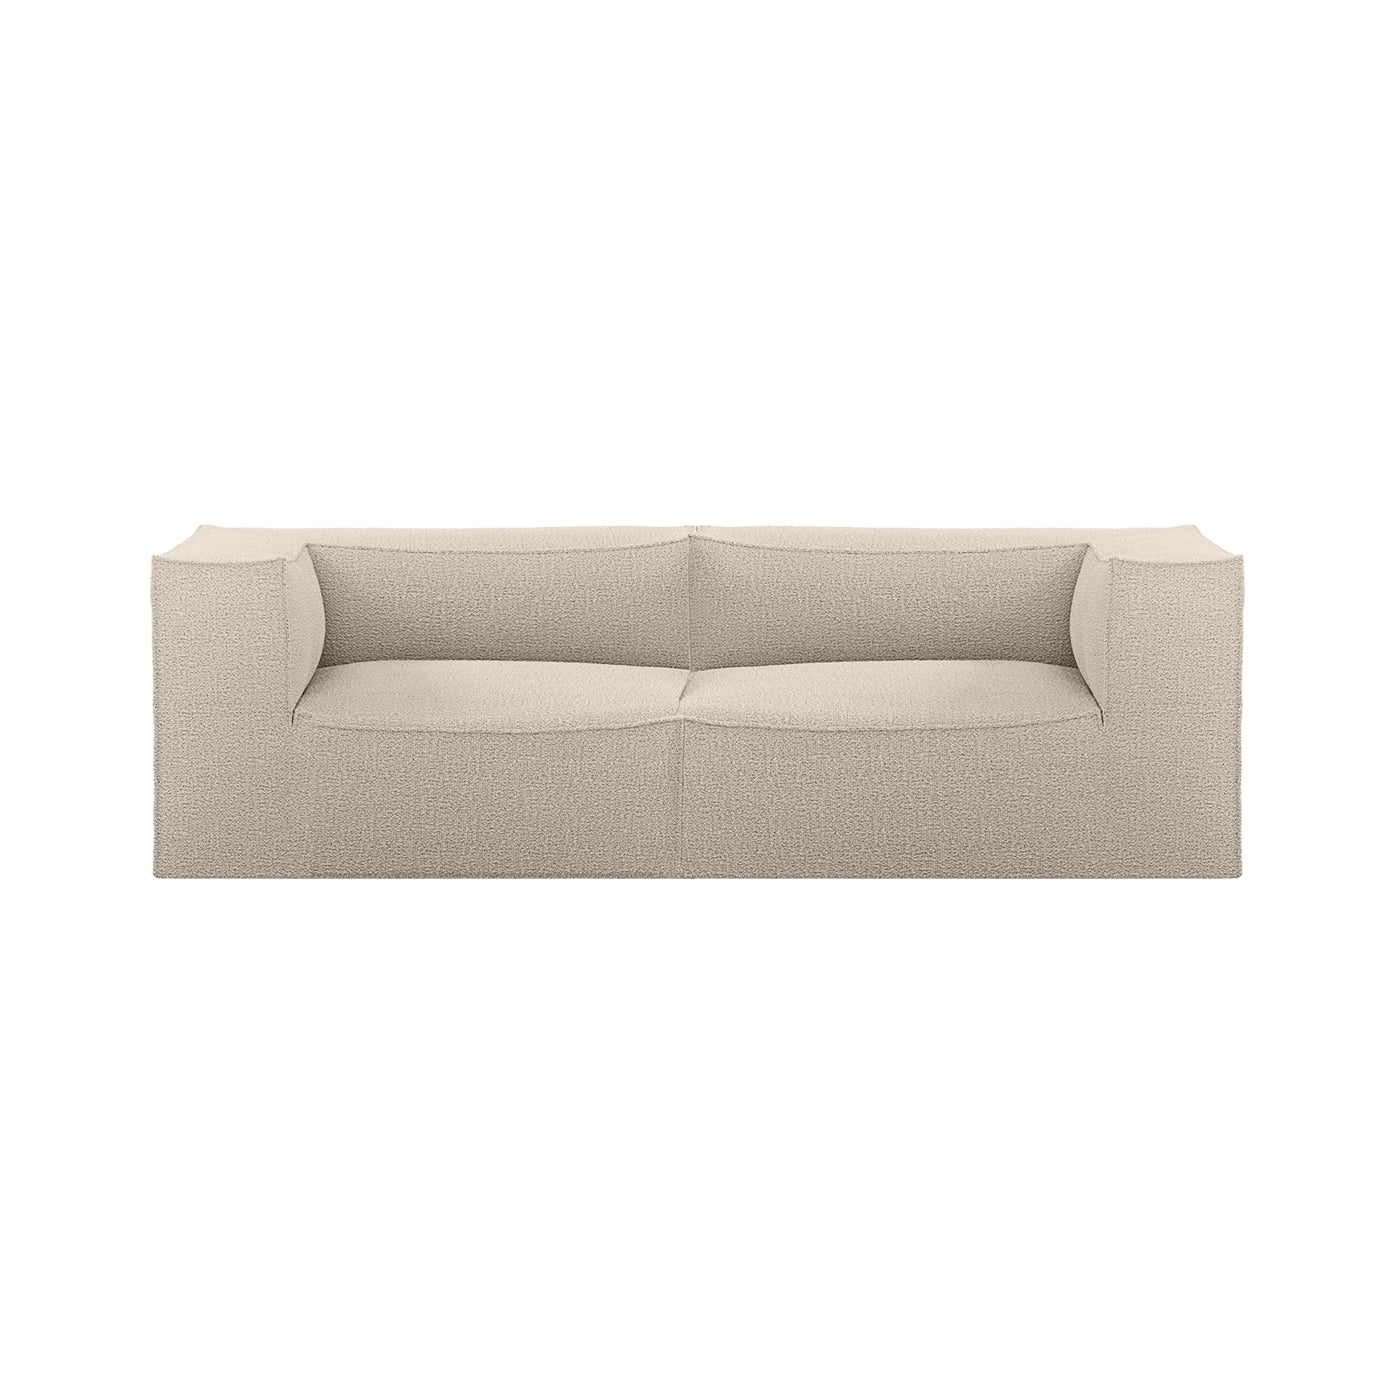 Ferm LIVING Catena Modular 2 Seater sofa. Made to order at someday designs #colour_natural-wool-boucle